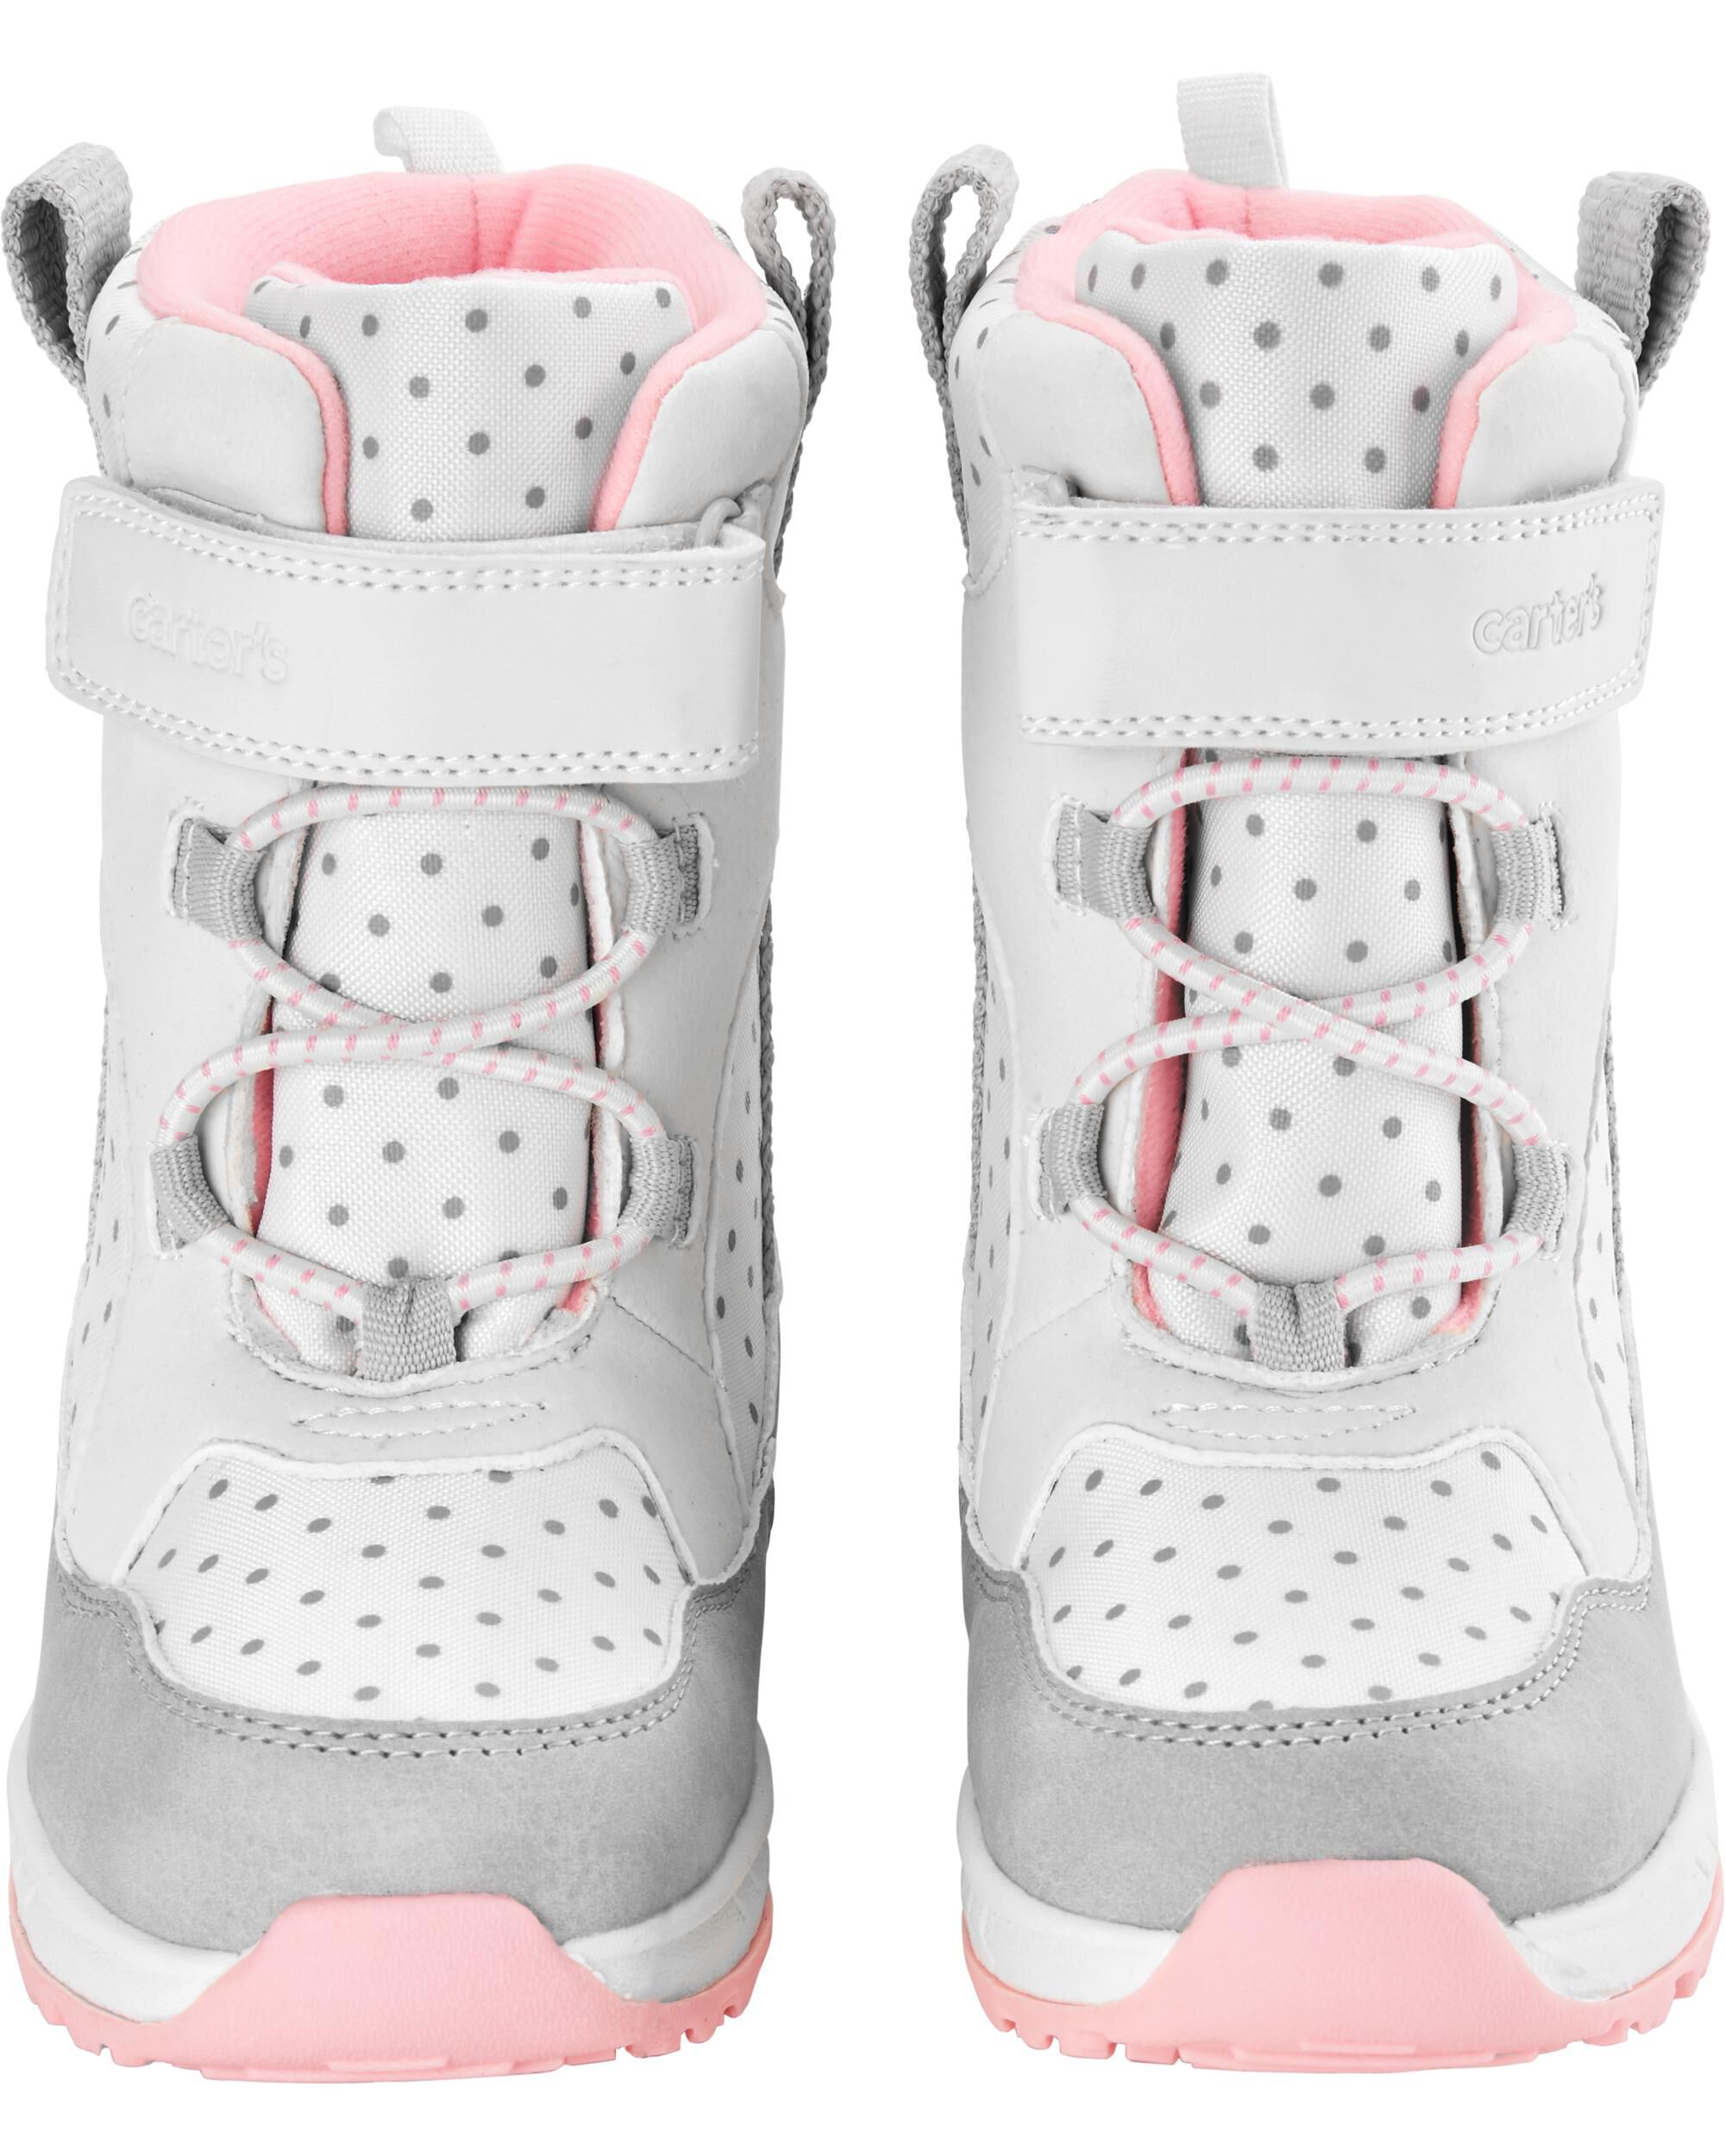 3.5 baby girl shoes